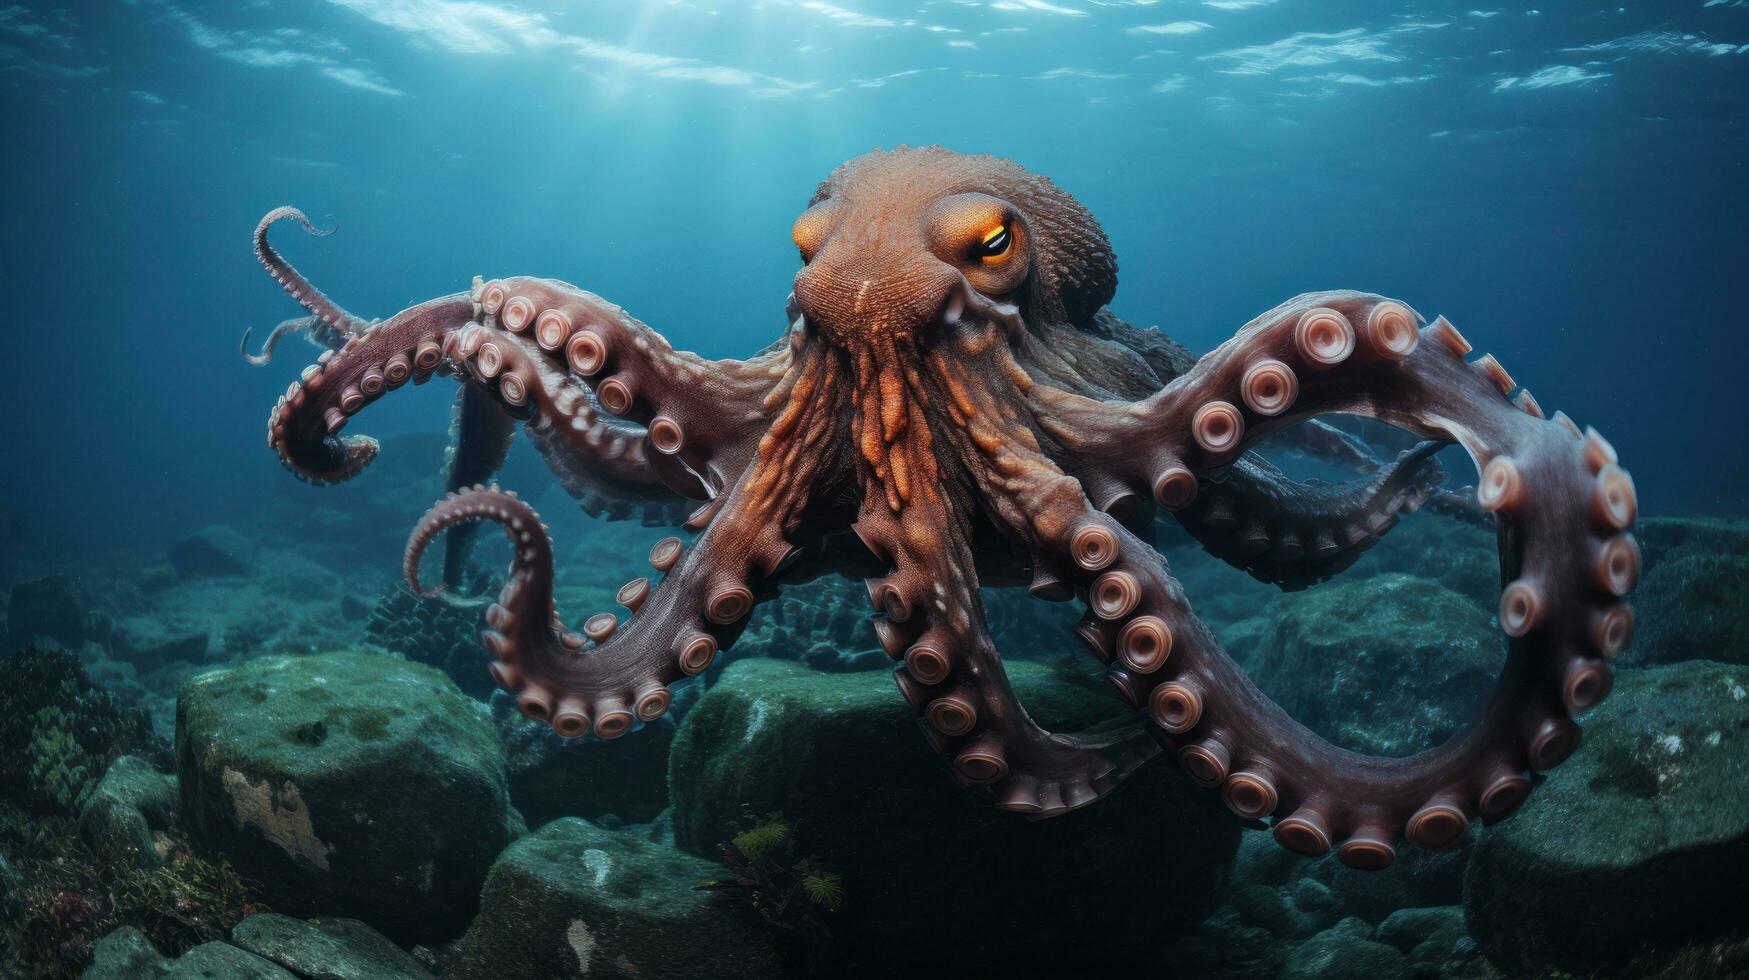 a large octopus swims in the depths of the ocean photo